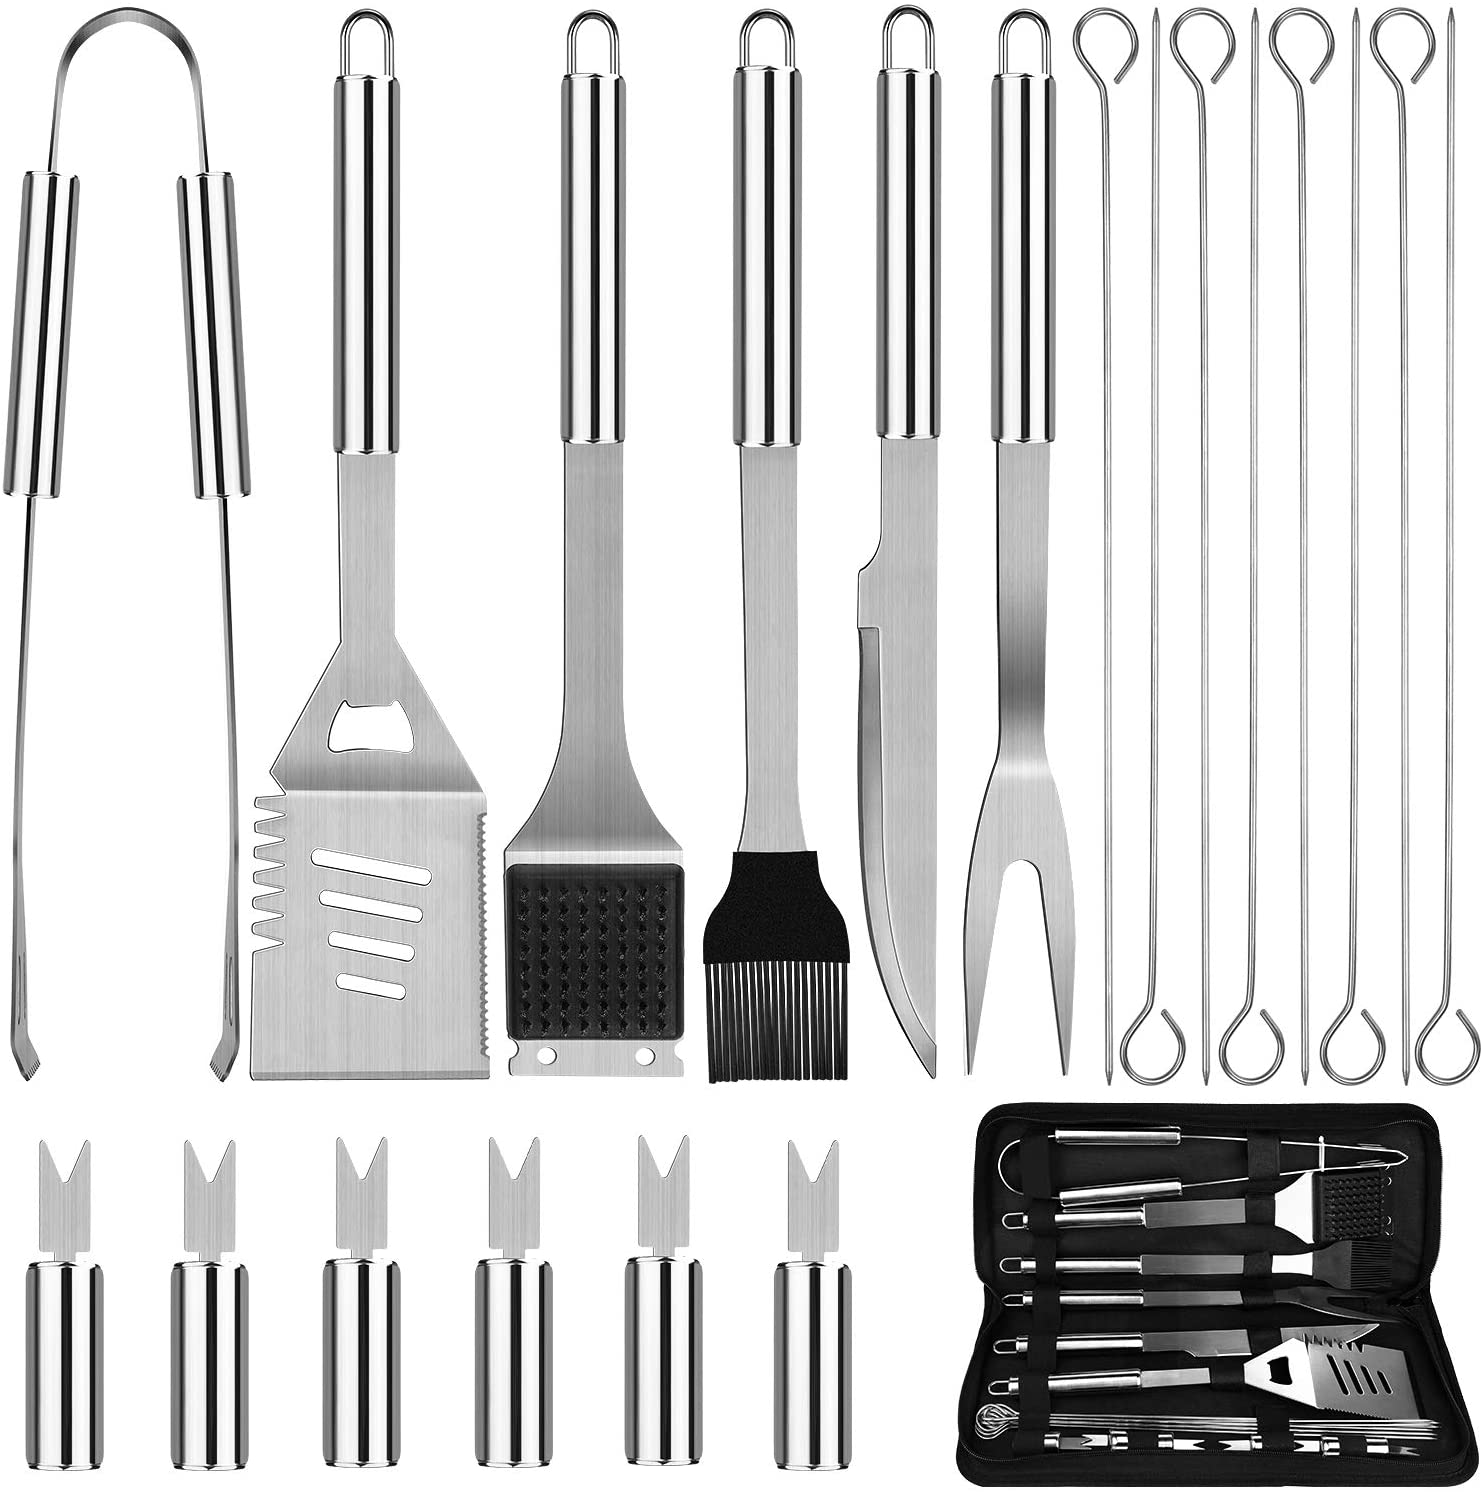 21 PCS Stainless Steel Grill Kit with Case